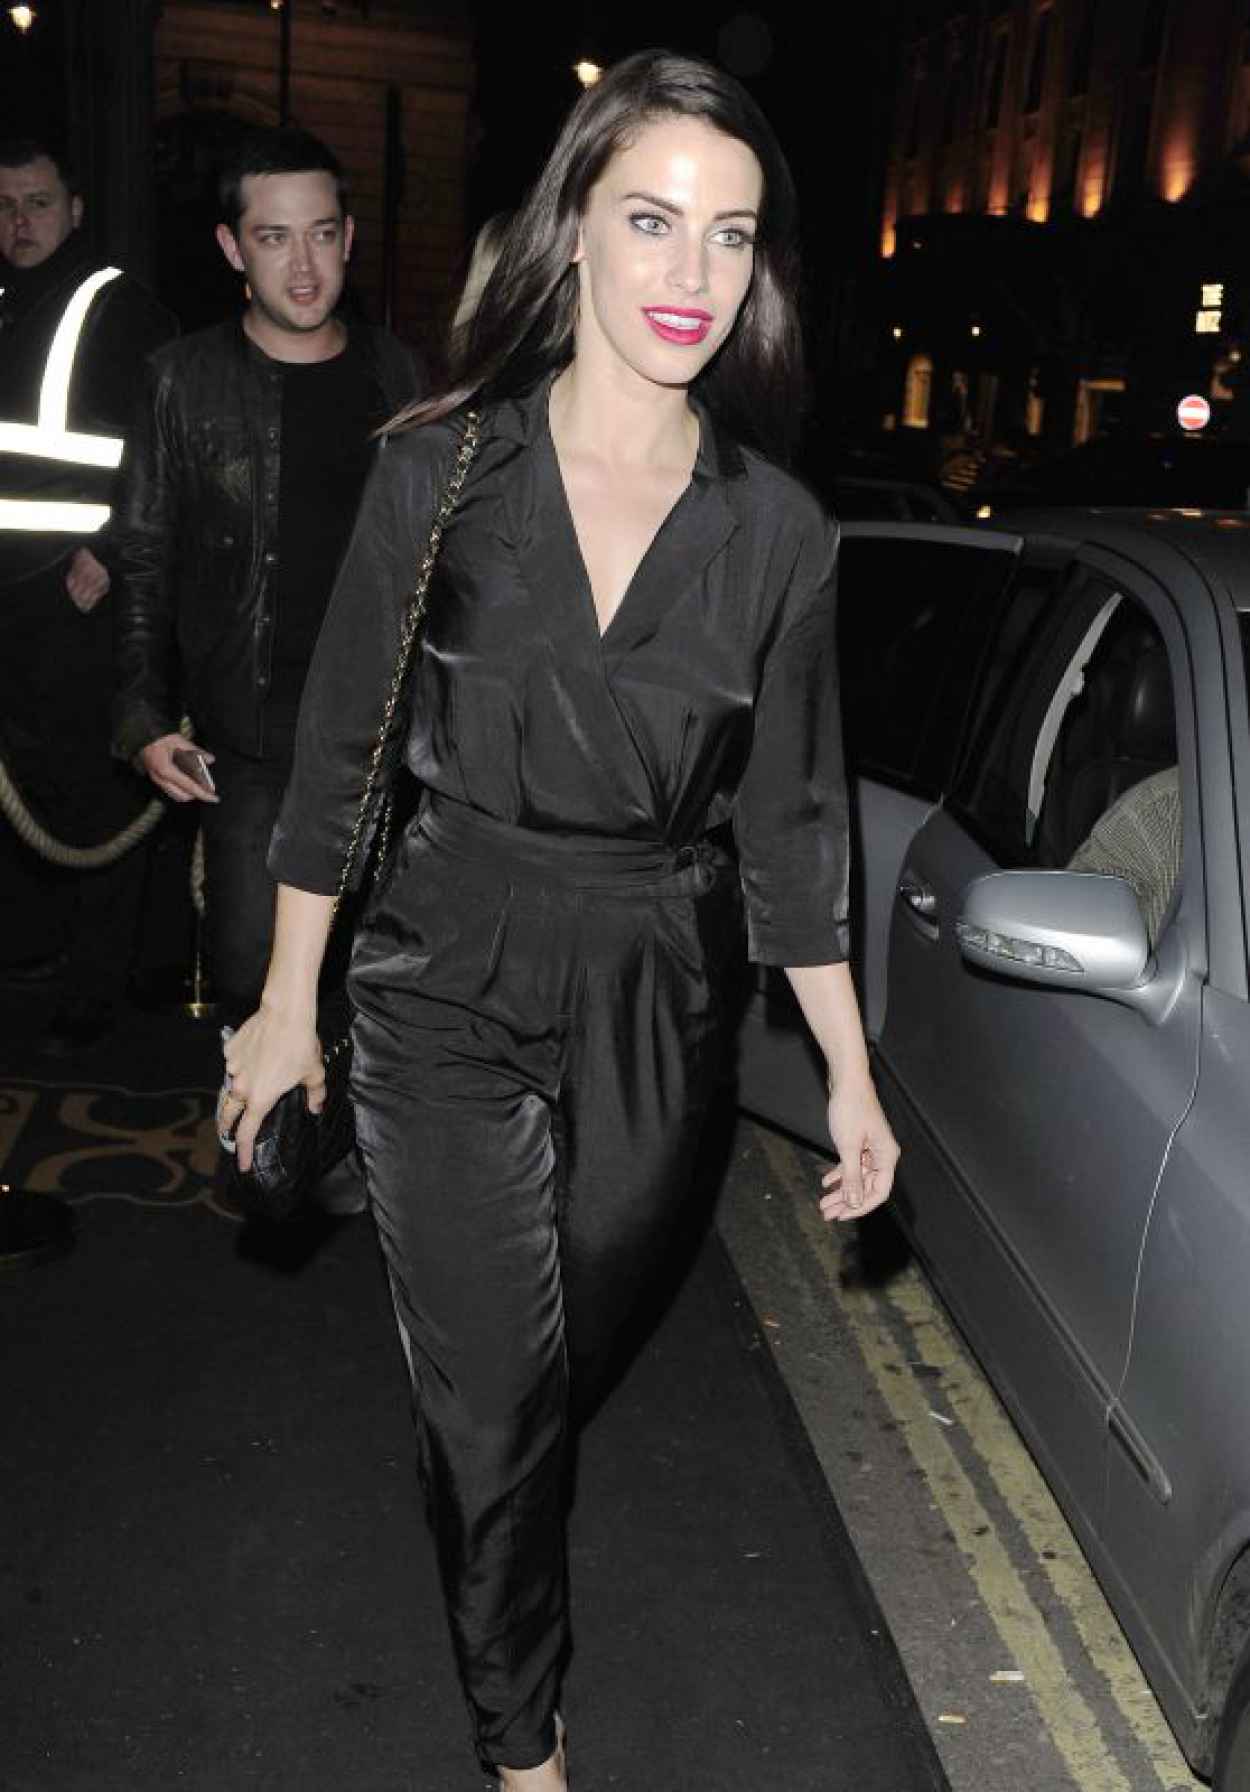 Jessica Lowndes Night Out Style - At the Mahiki Nightclub in London, May 2015-1